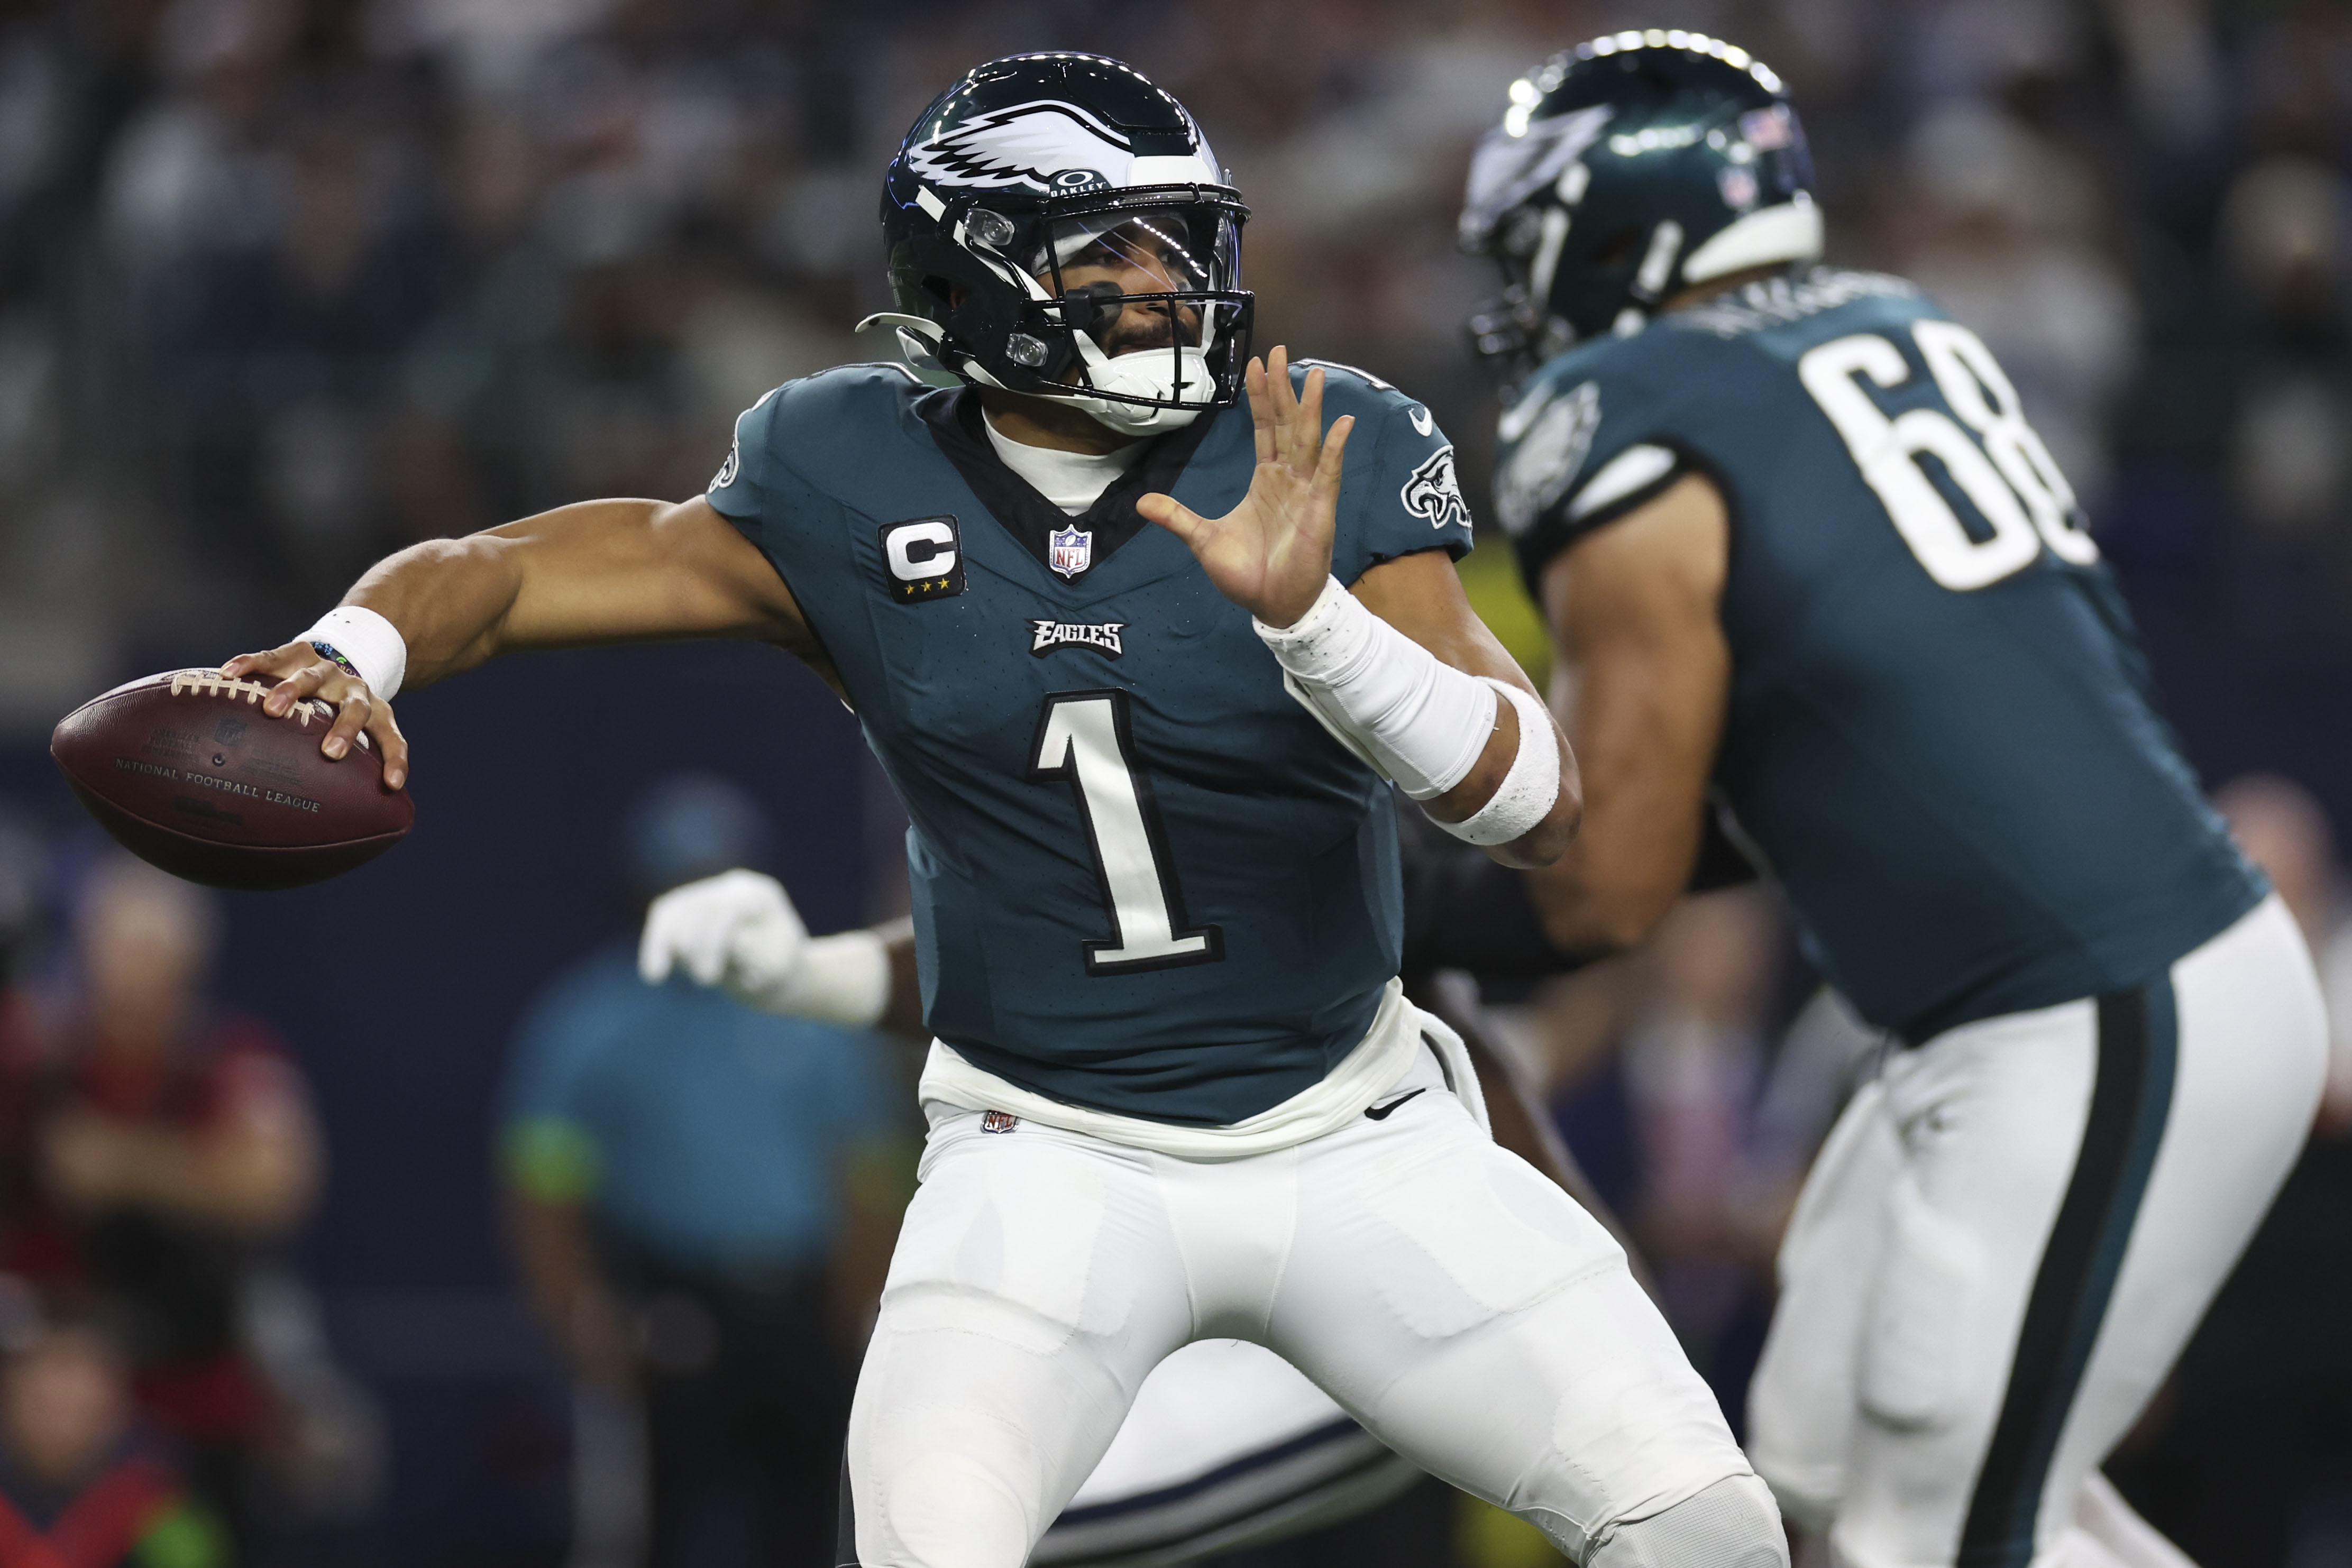 Eagles-Cowboys: Start time, channel, how to watch and stream